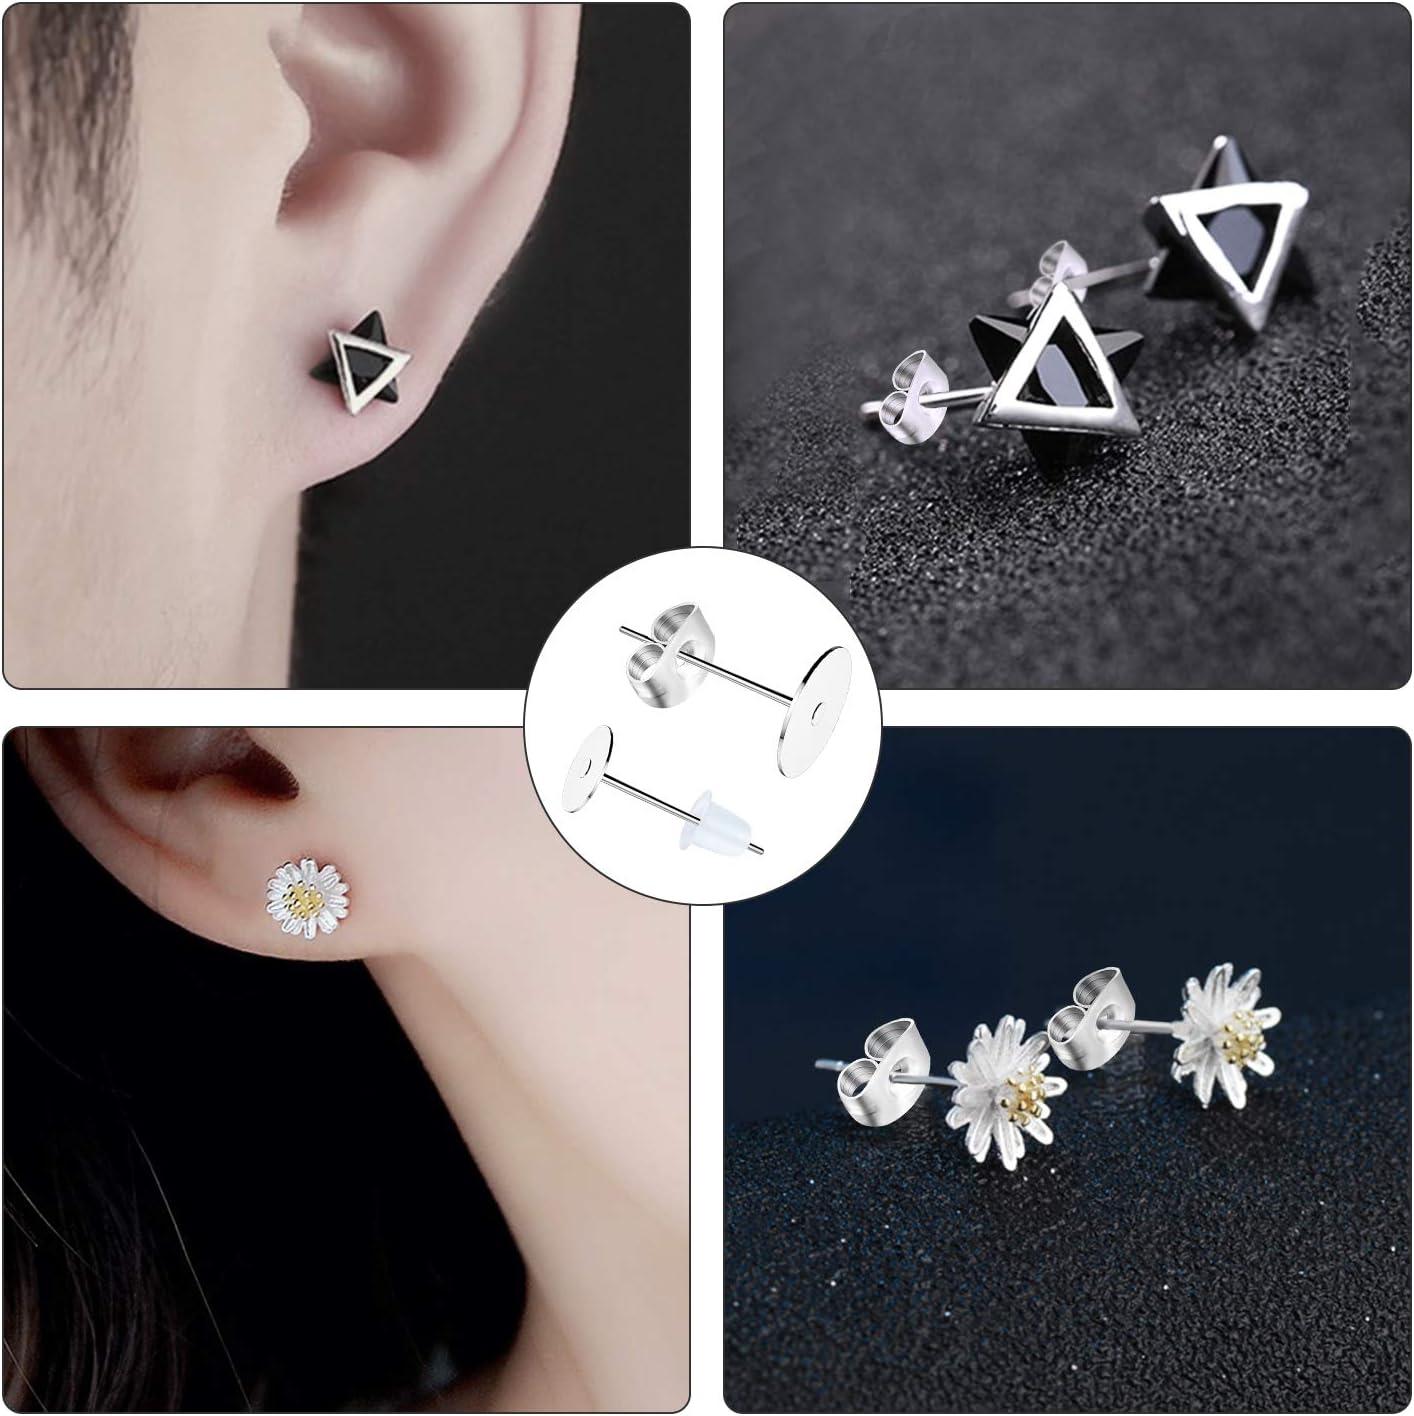 Earring Posts Stainless Steel Hypoallergenic, 420Pcs 4mm/6mm Steel Flat Pad  Earring Studs, Butterfly and Clear Rubber Earring Backs for Jewelry Making